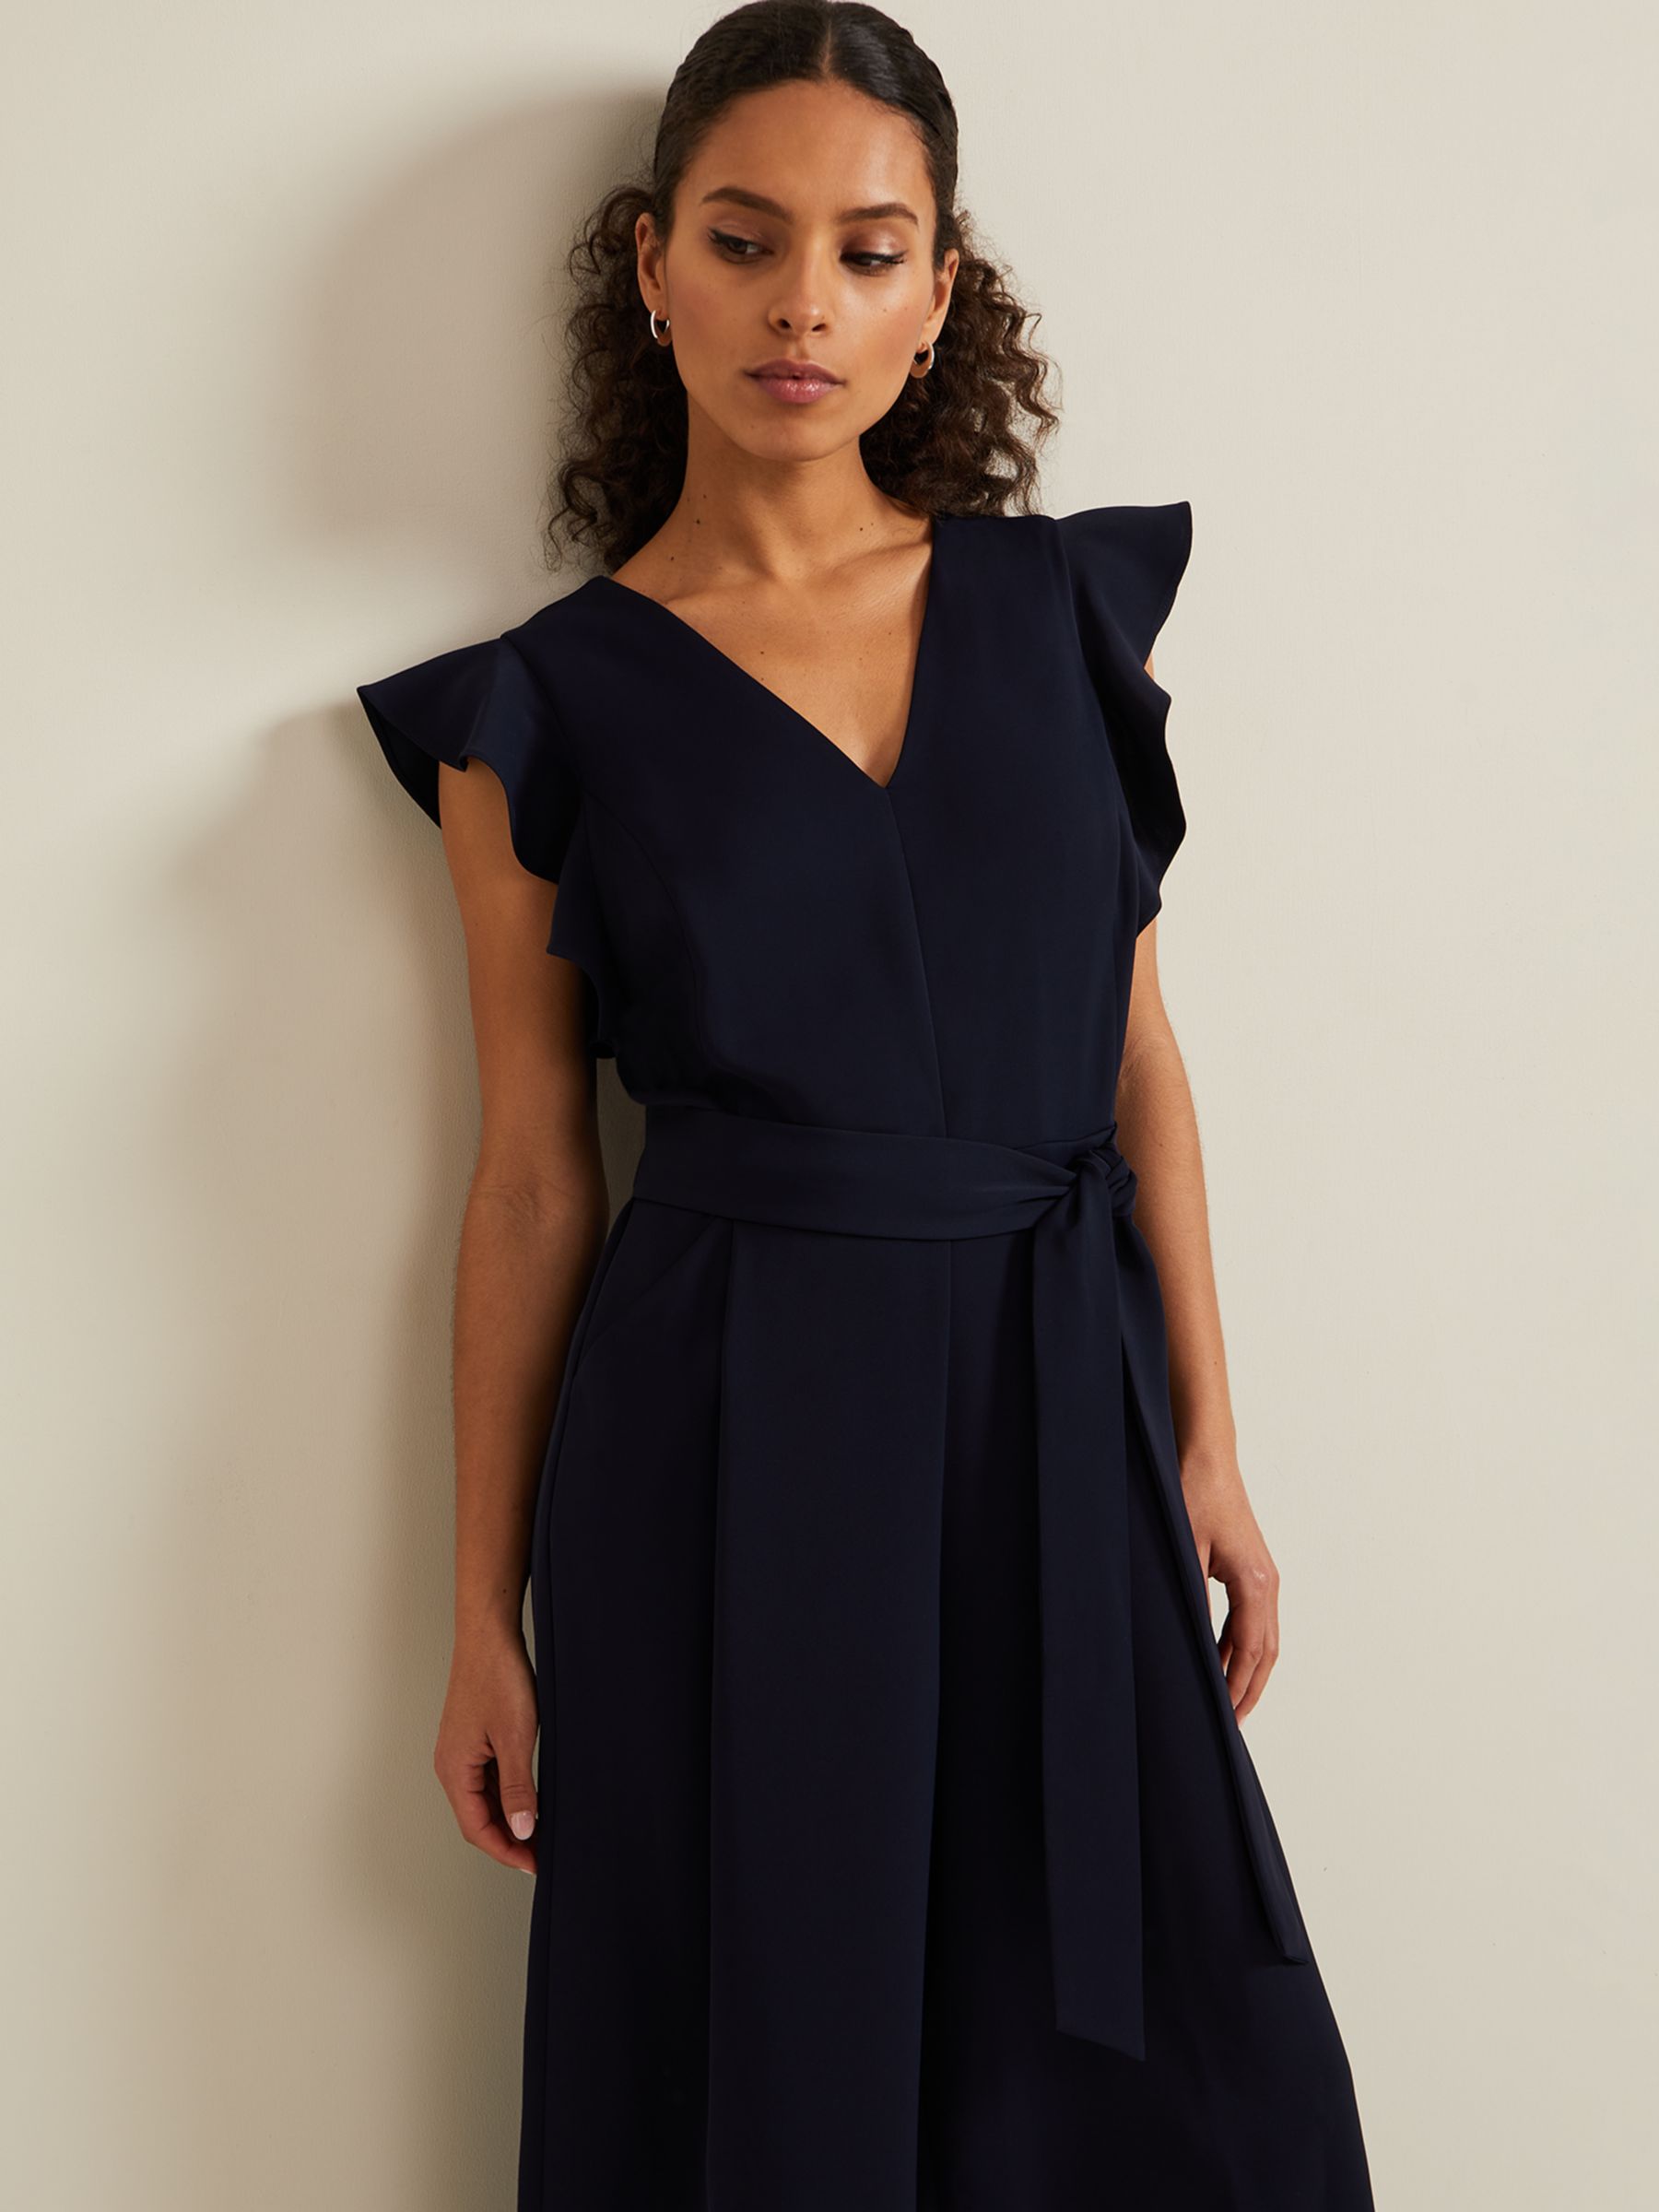 Buy Phase Eight Petite Kallie Frill Sleeve Jumpsuit, Navy Online at johnlewis.com